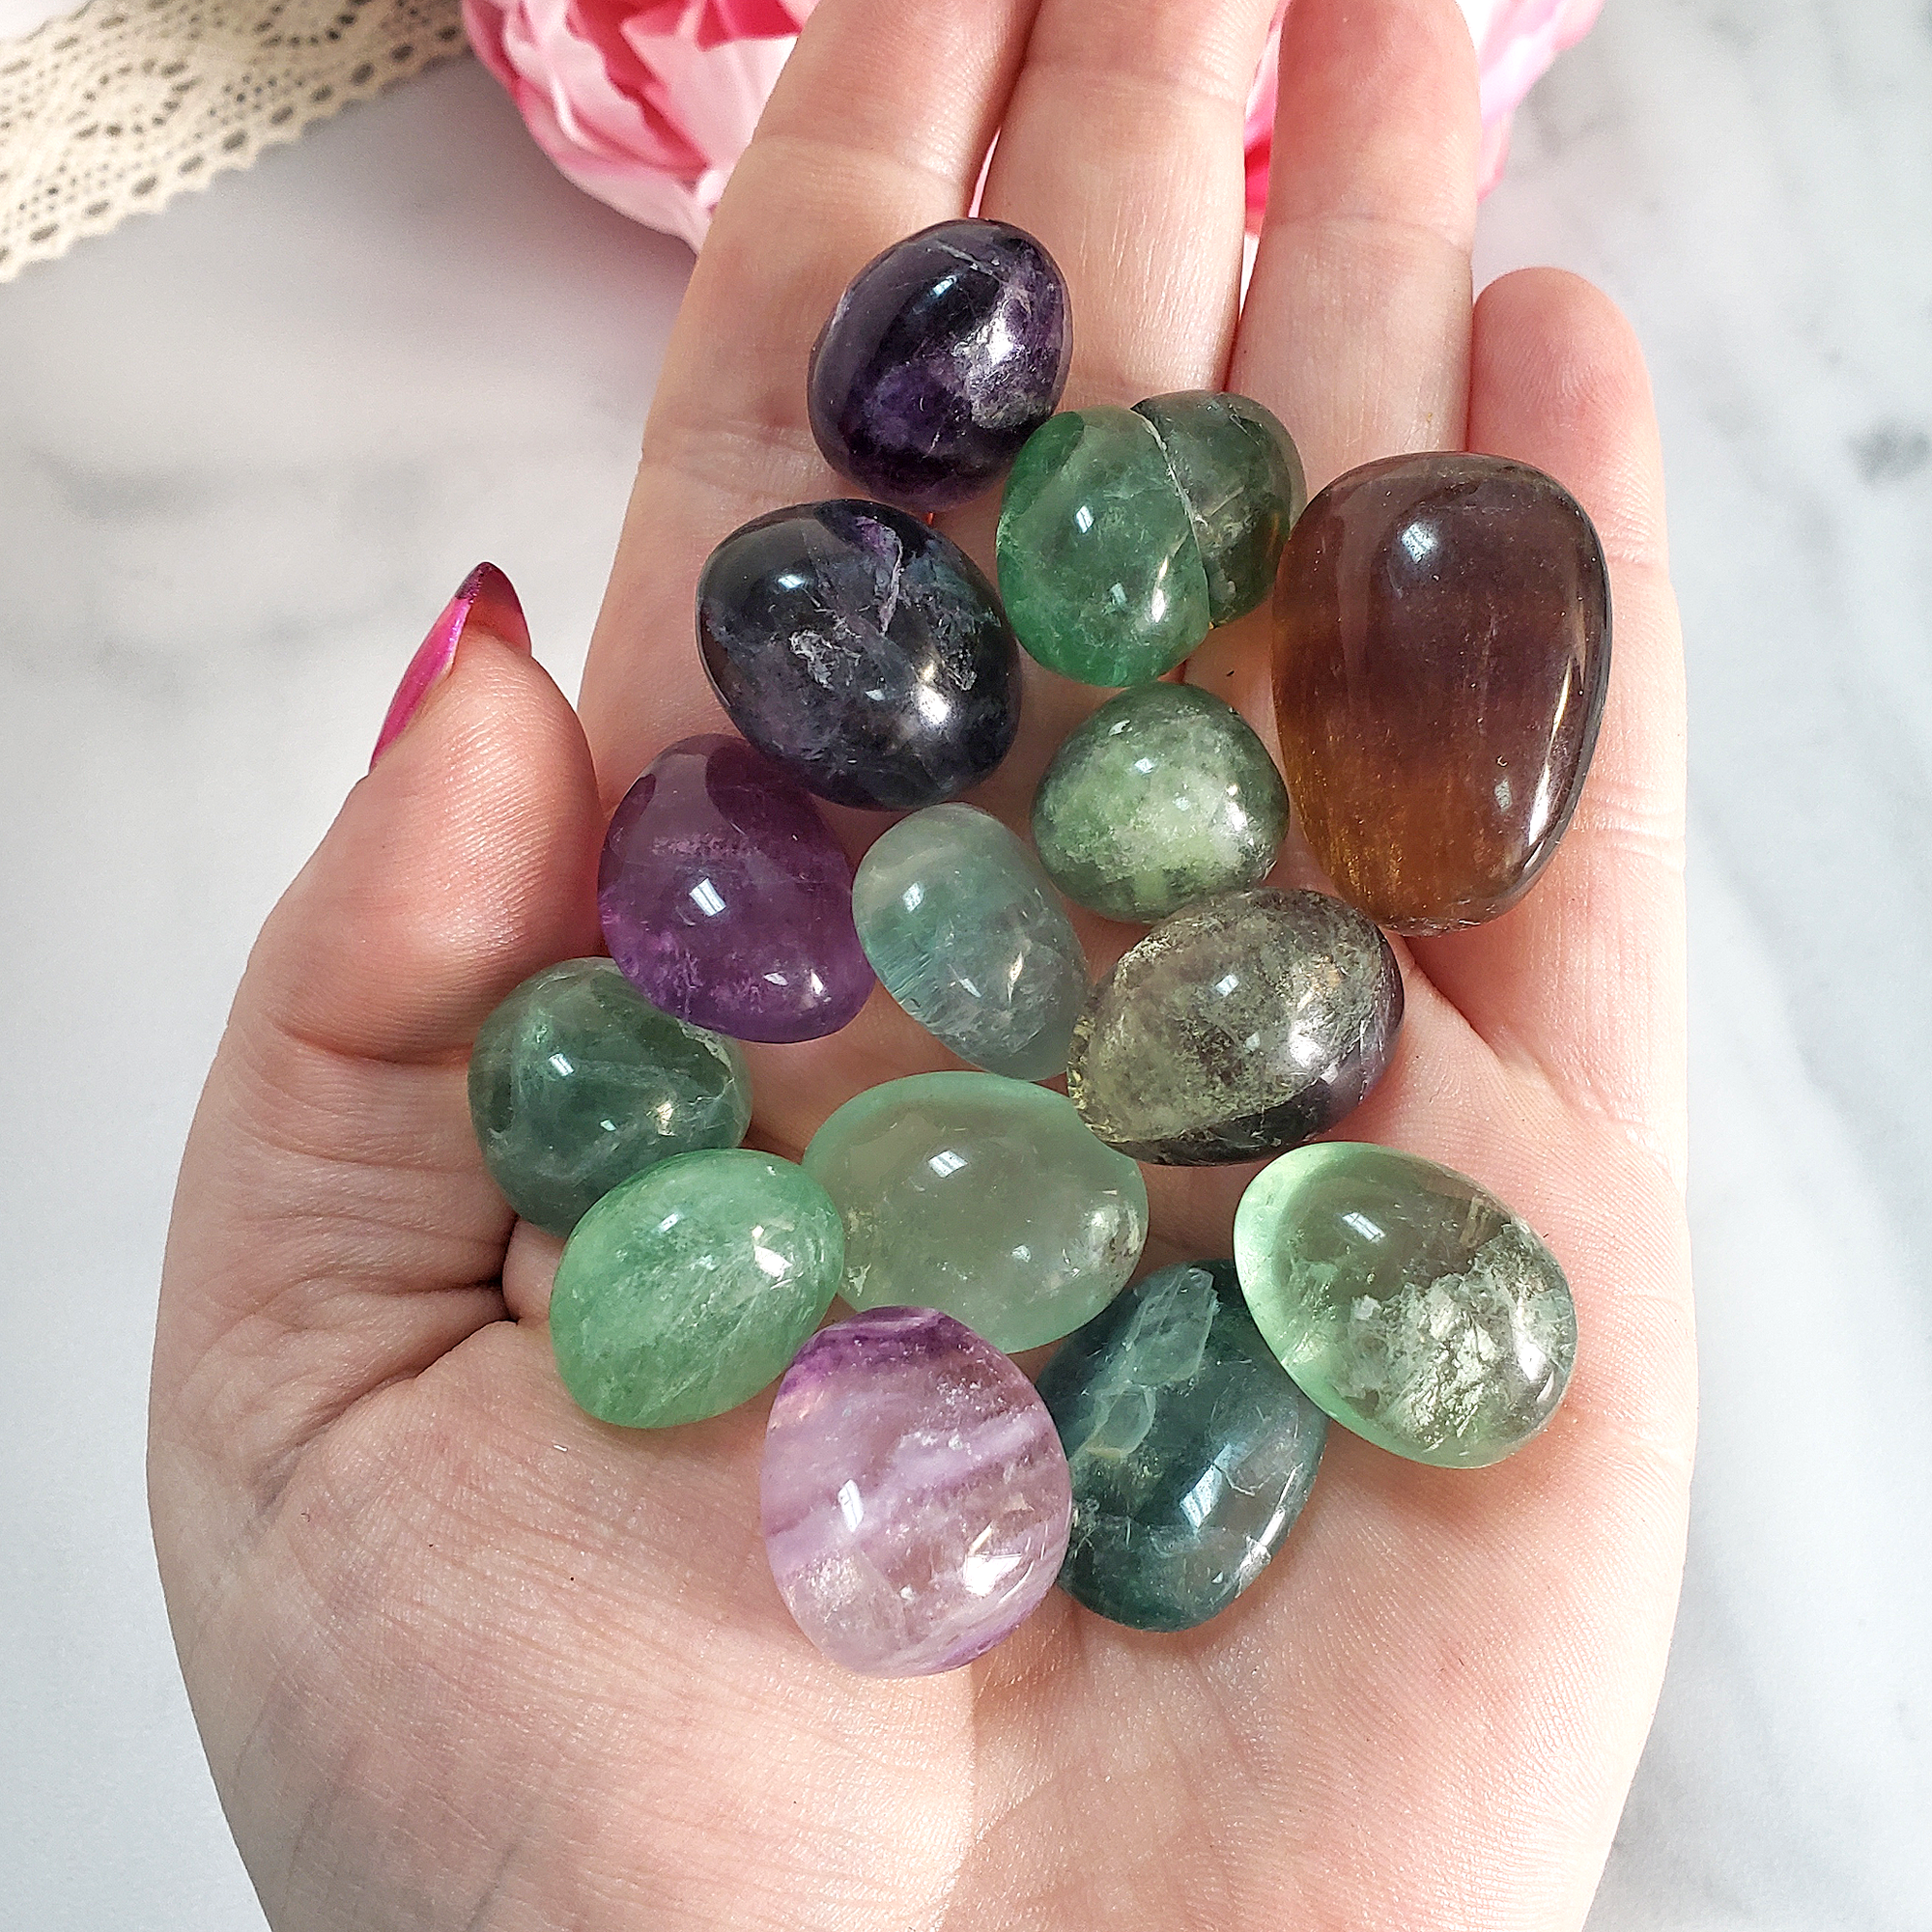 Fluorite Crystal Natural Gemstone Tumbled Stone | High Quality - Handful of Gemmy Fluorite Tumbled Crystals